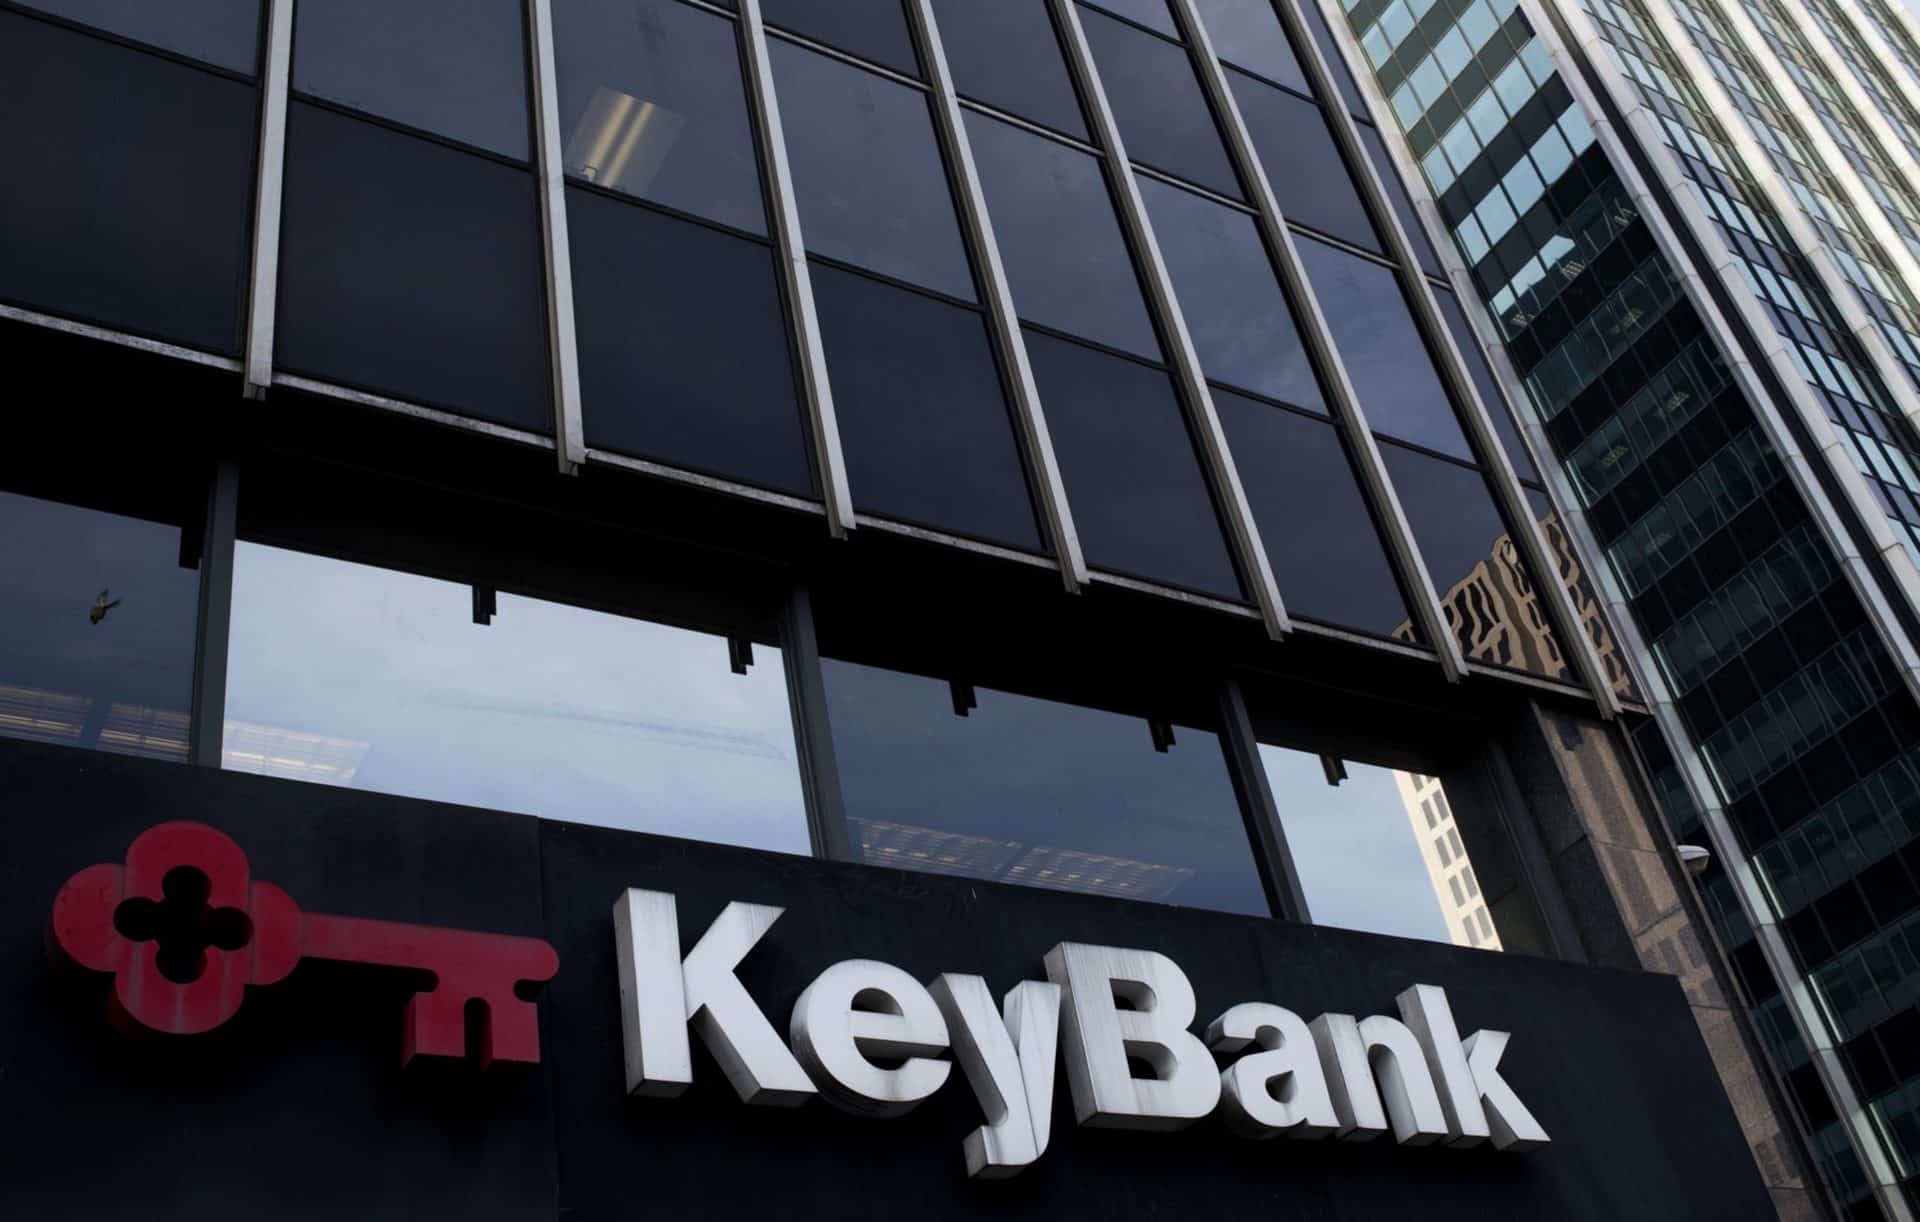 KeyBank grows geographic footprint by targeting doctors, dentists